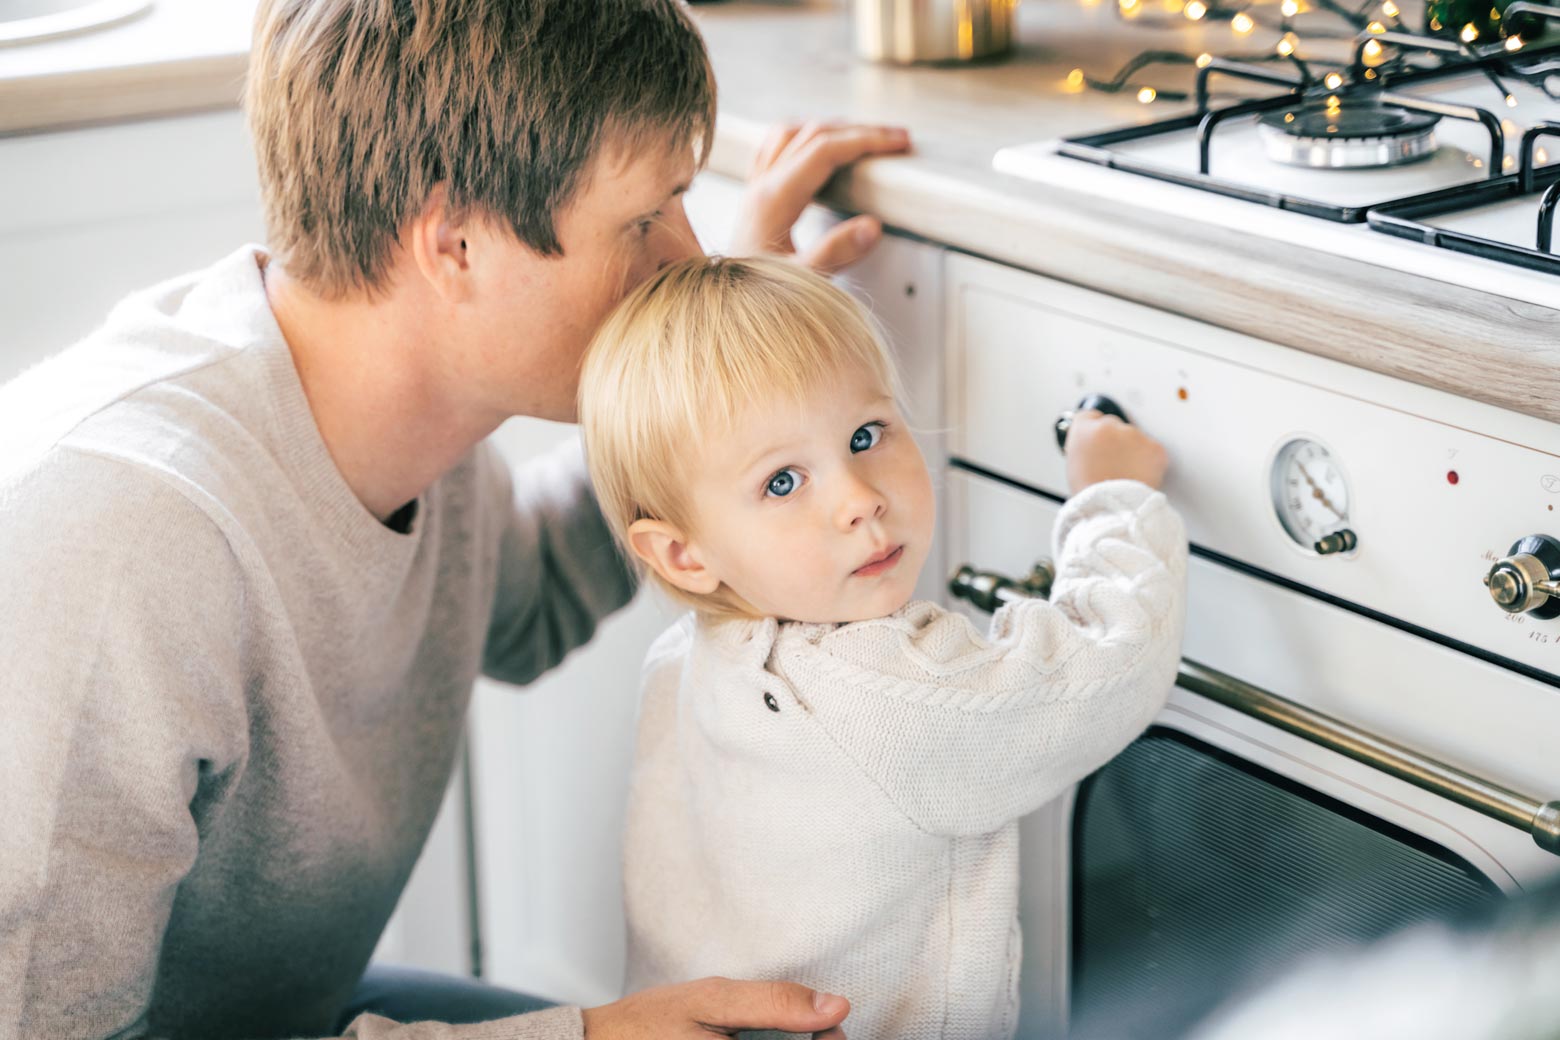 Child and father next to a gas stove.